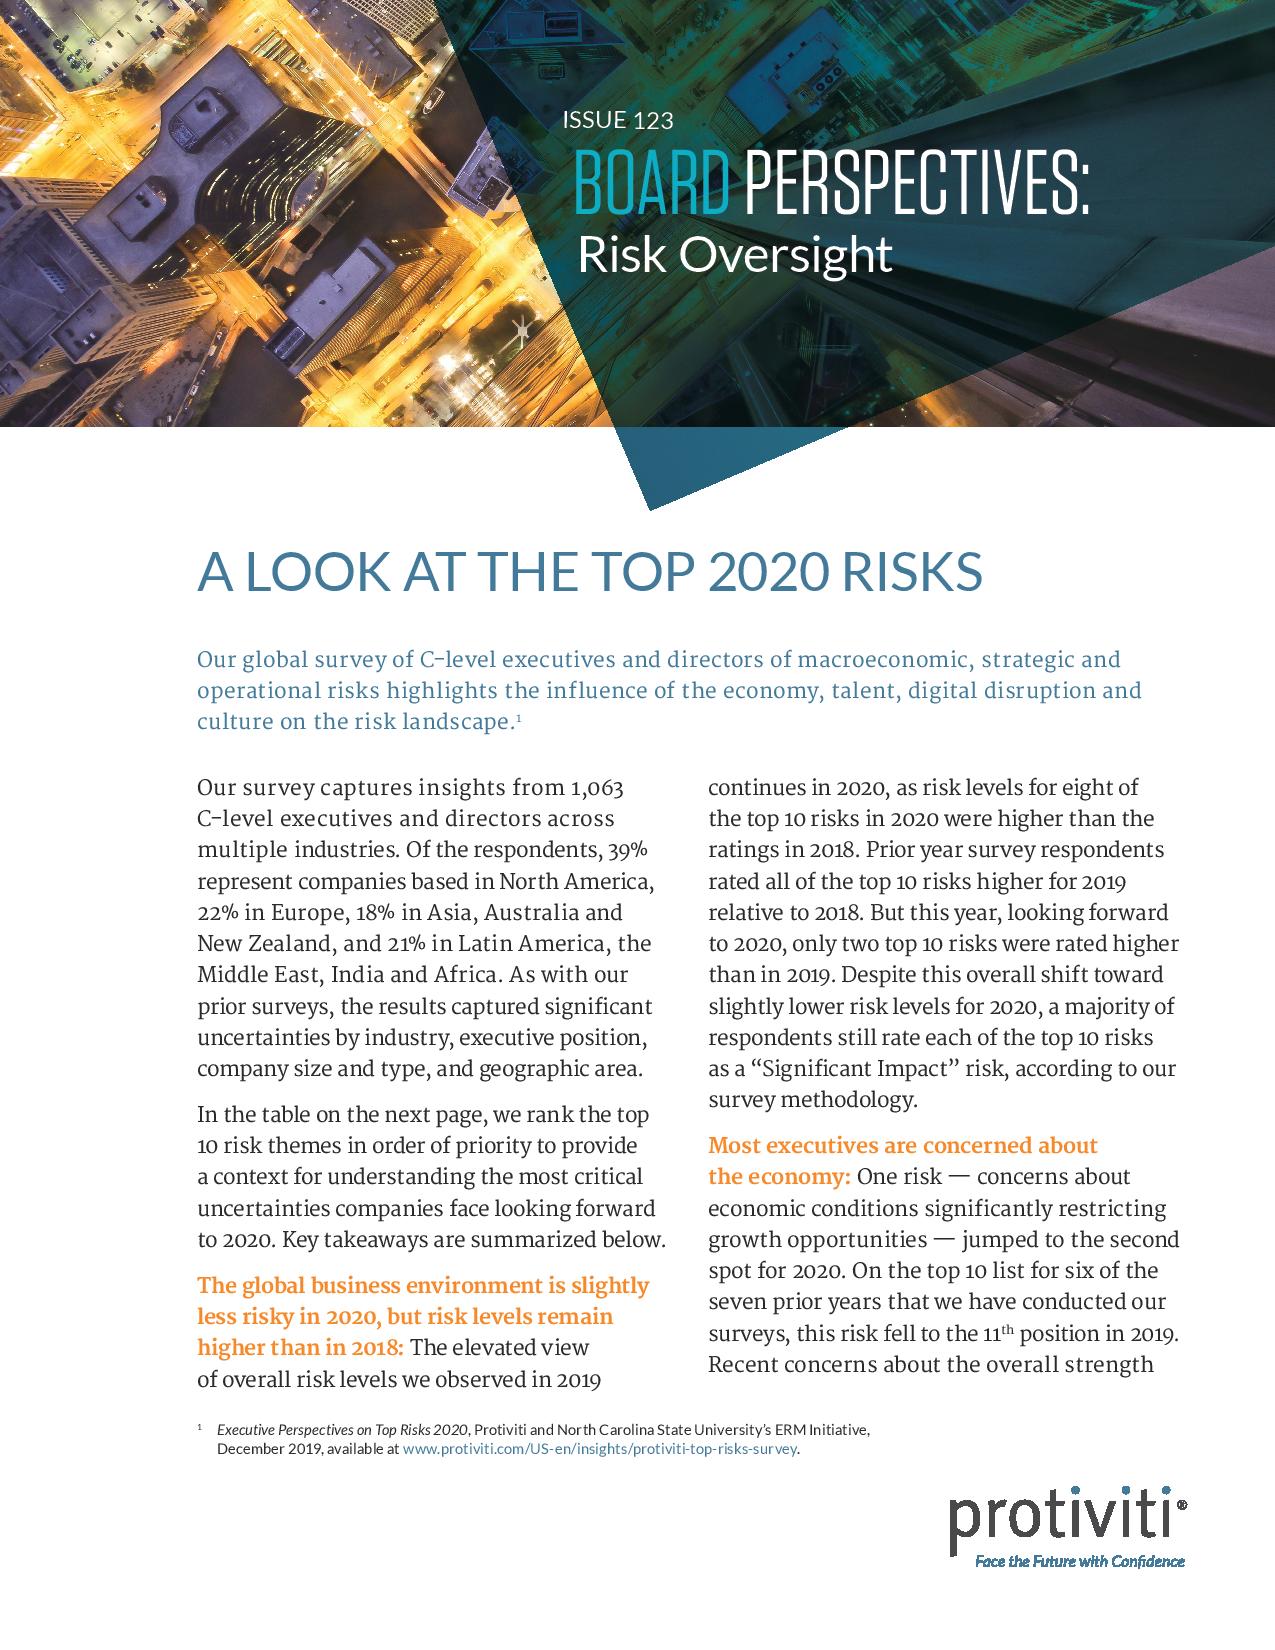 Screenshot of the first page of A Look at the Top 2020 Risks